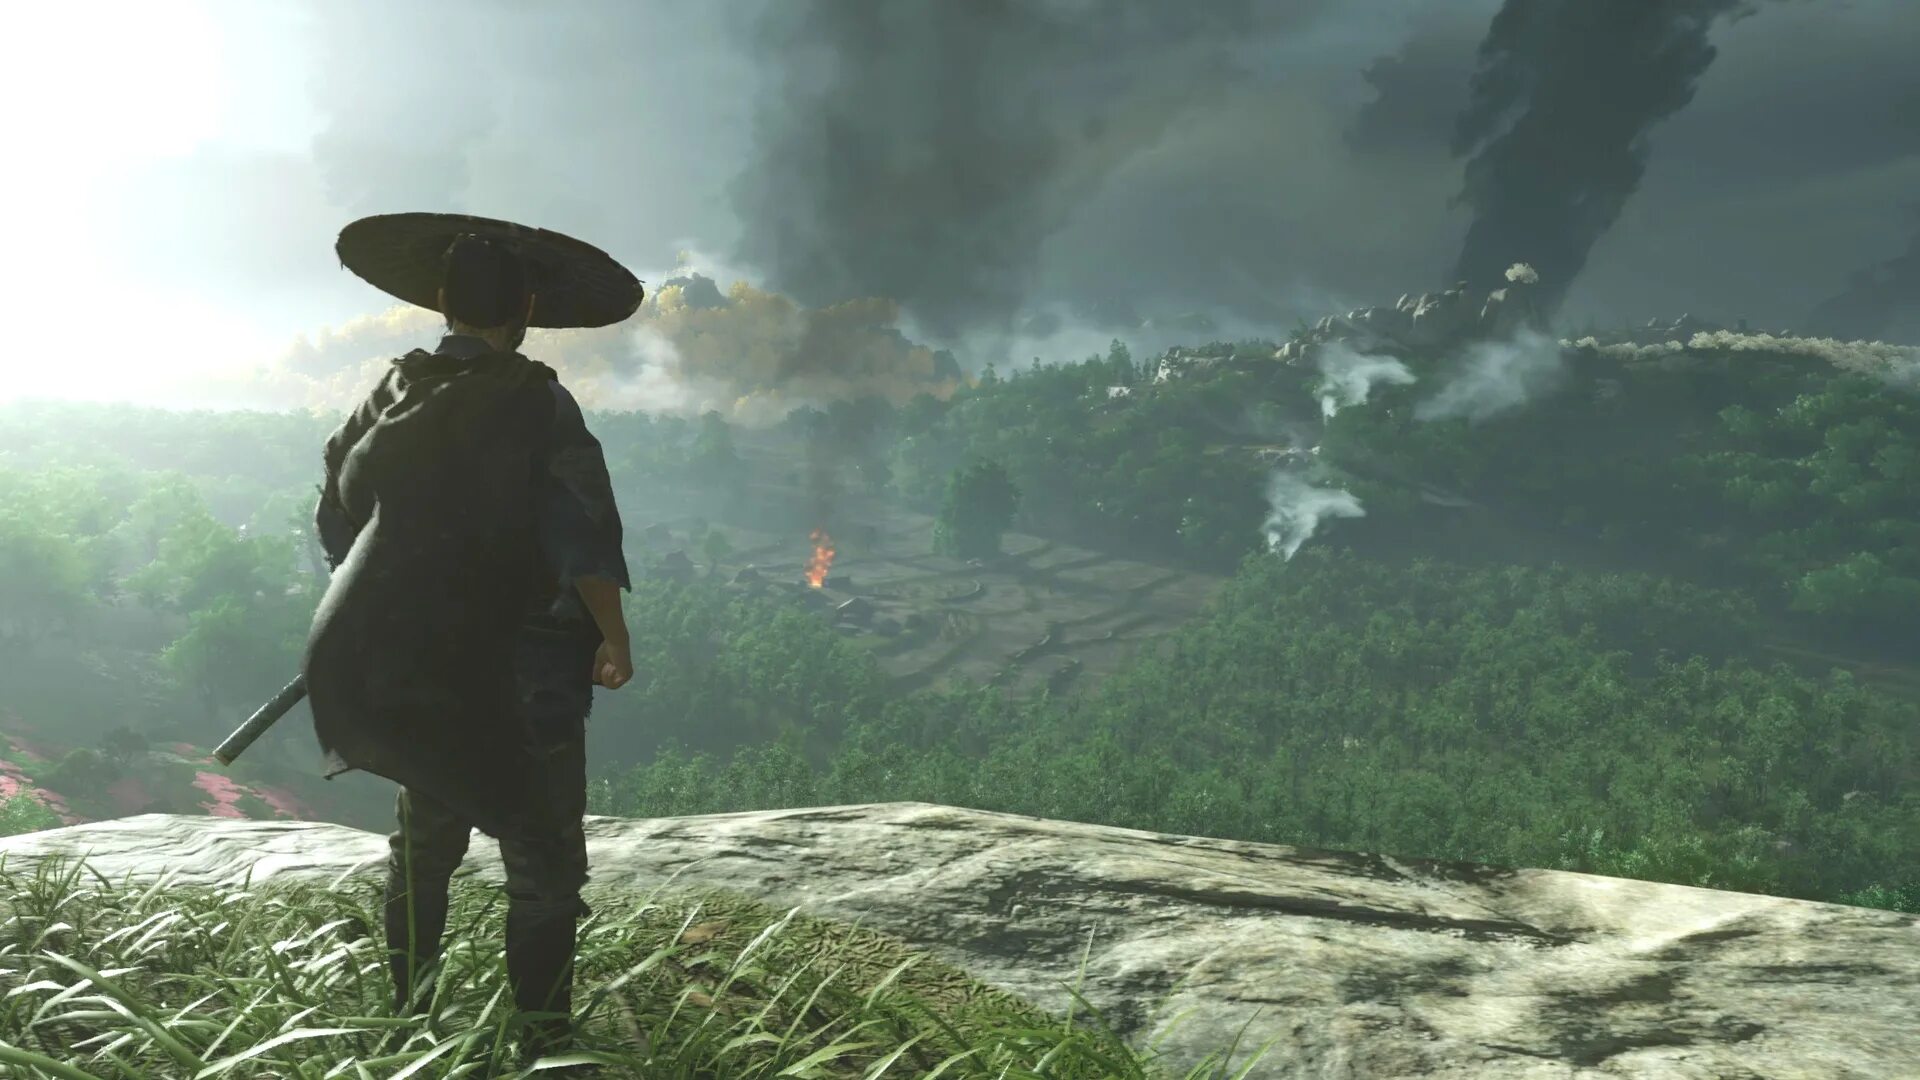 Ghost of tsushima pc system requirements. Игра Ghost of Tsushima. Призрак Цусимы ps4 геймплей. Призрак Цусима. Ghost of Tsushima геймплей.